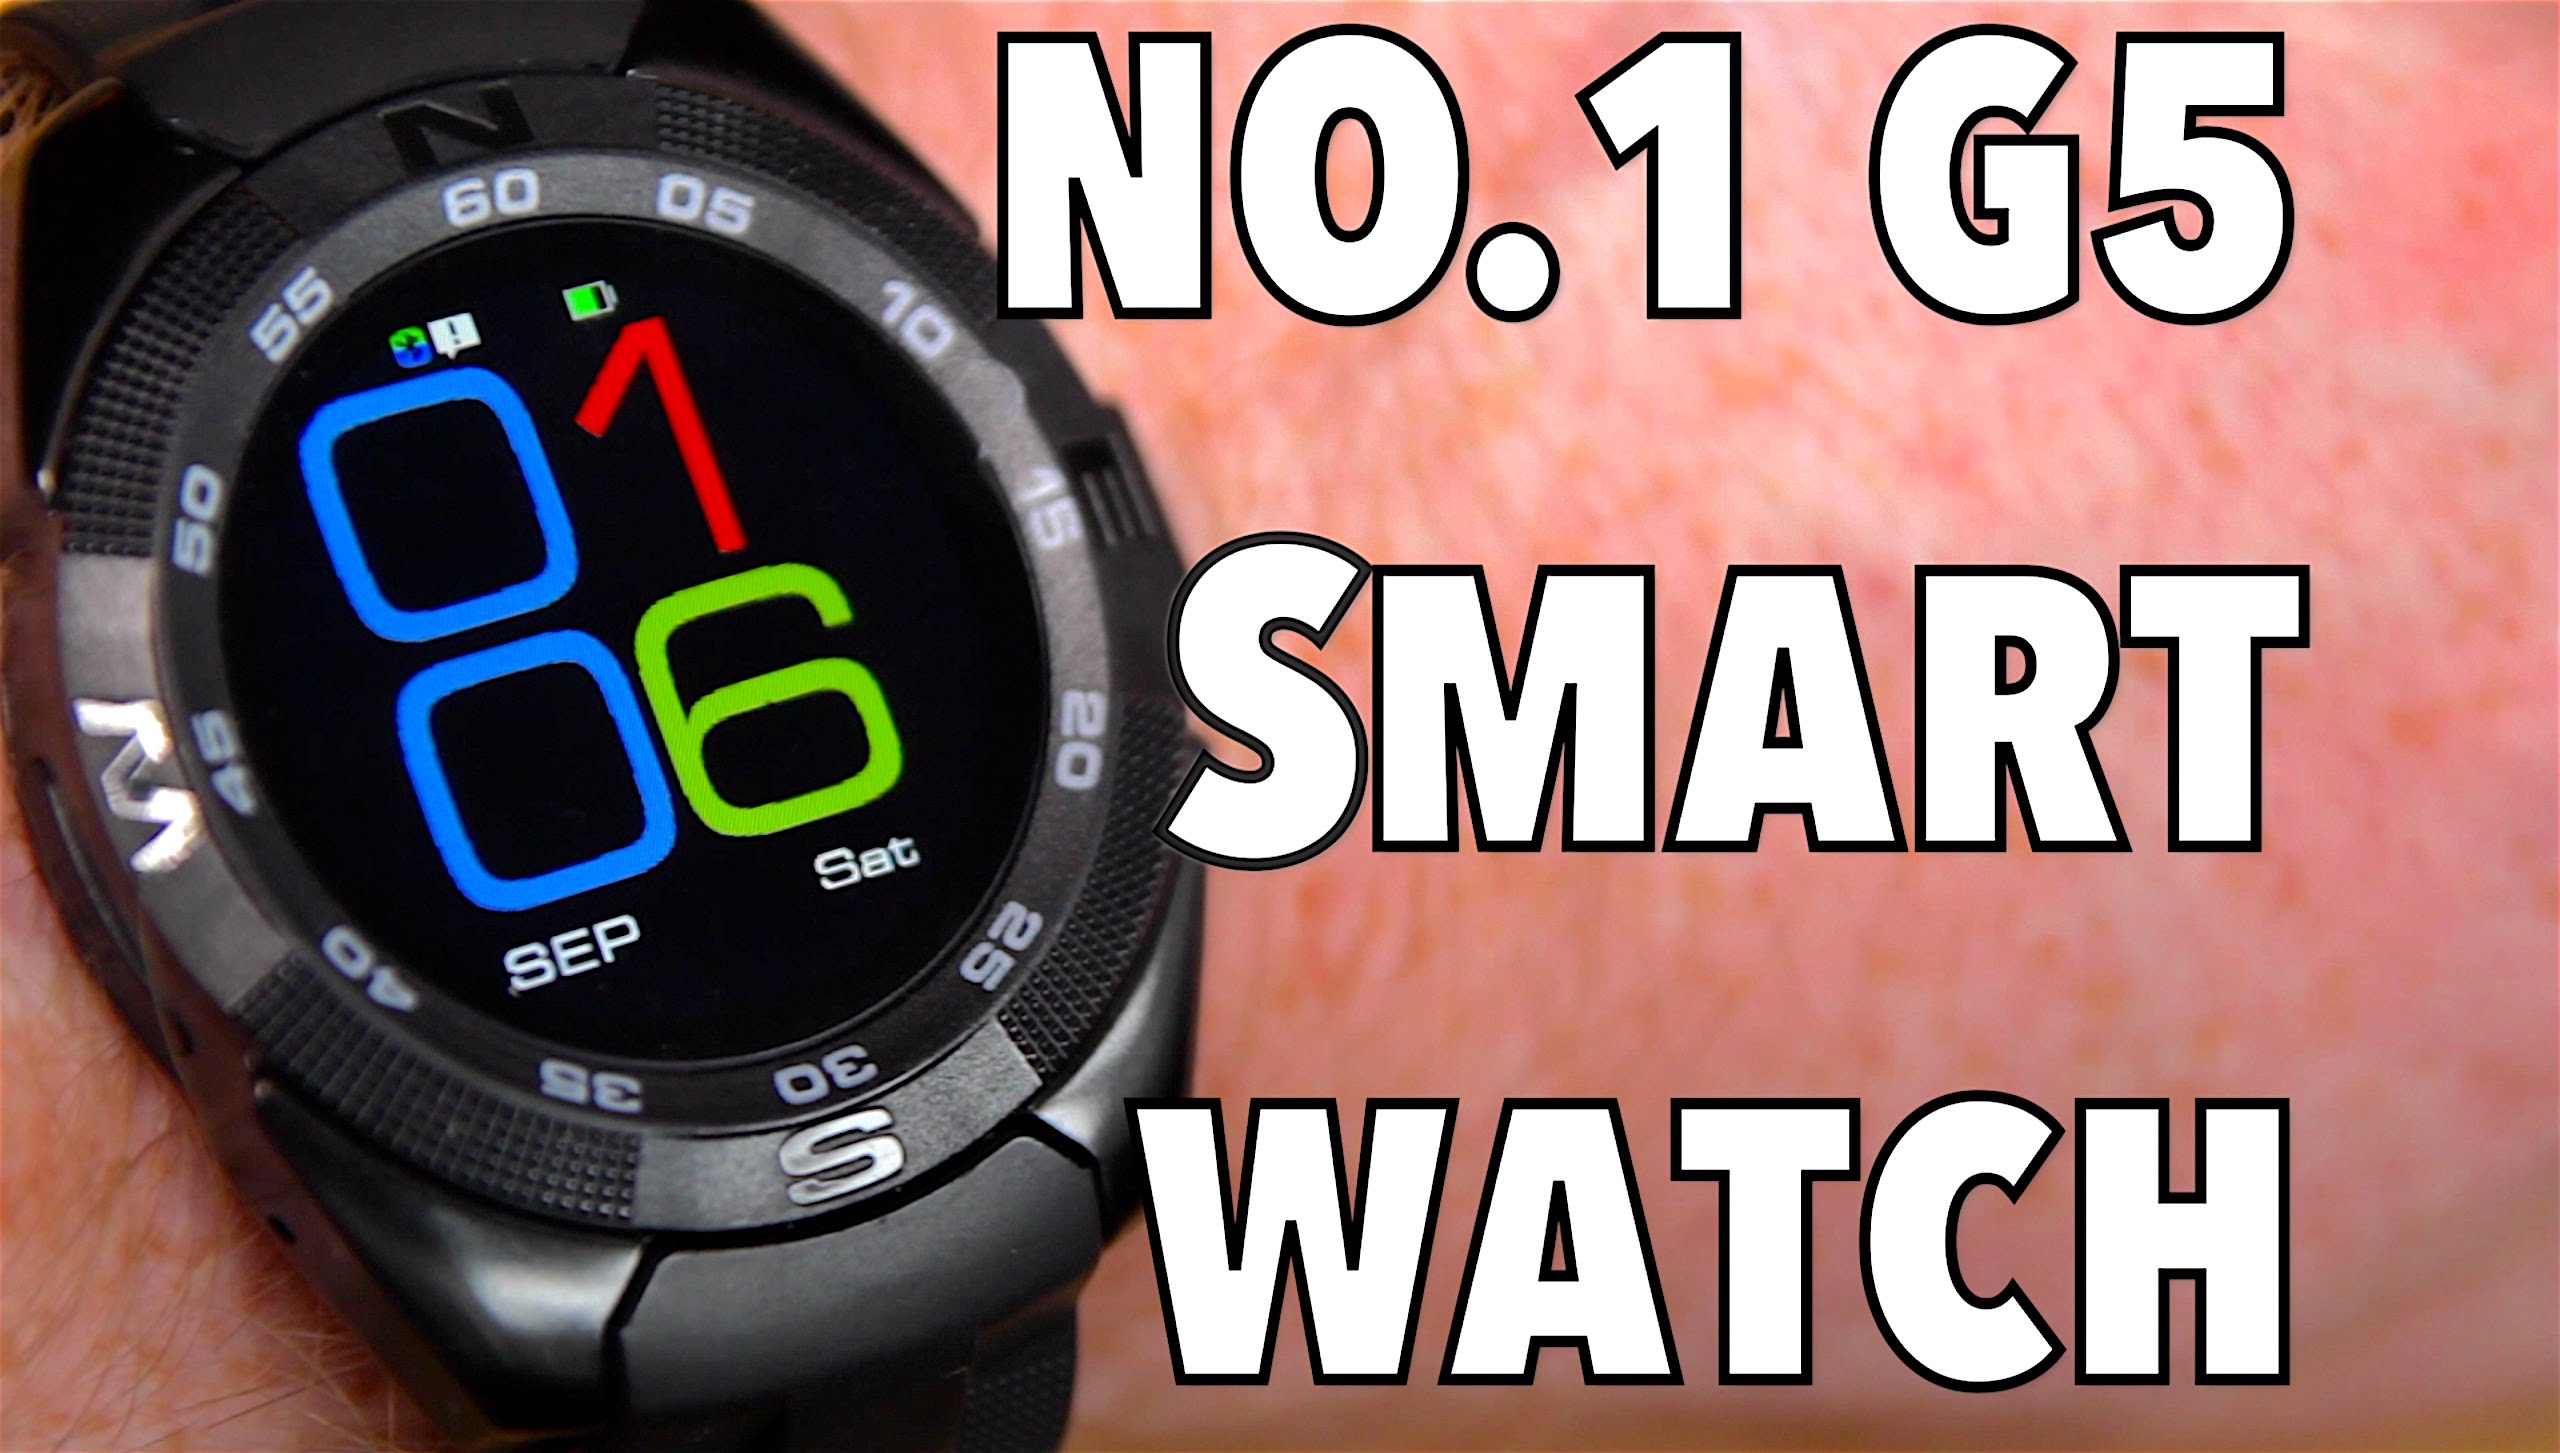 No.1 G5 Bluetooth Sports Smartwatch Unboxing & Review from Gearbest